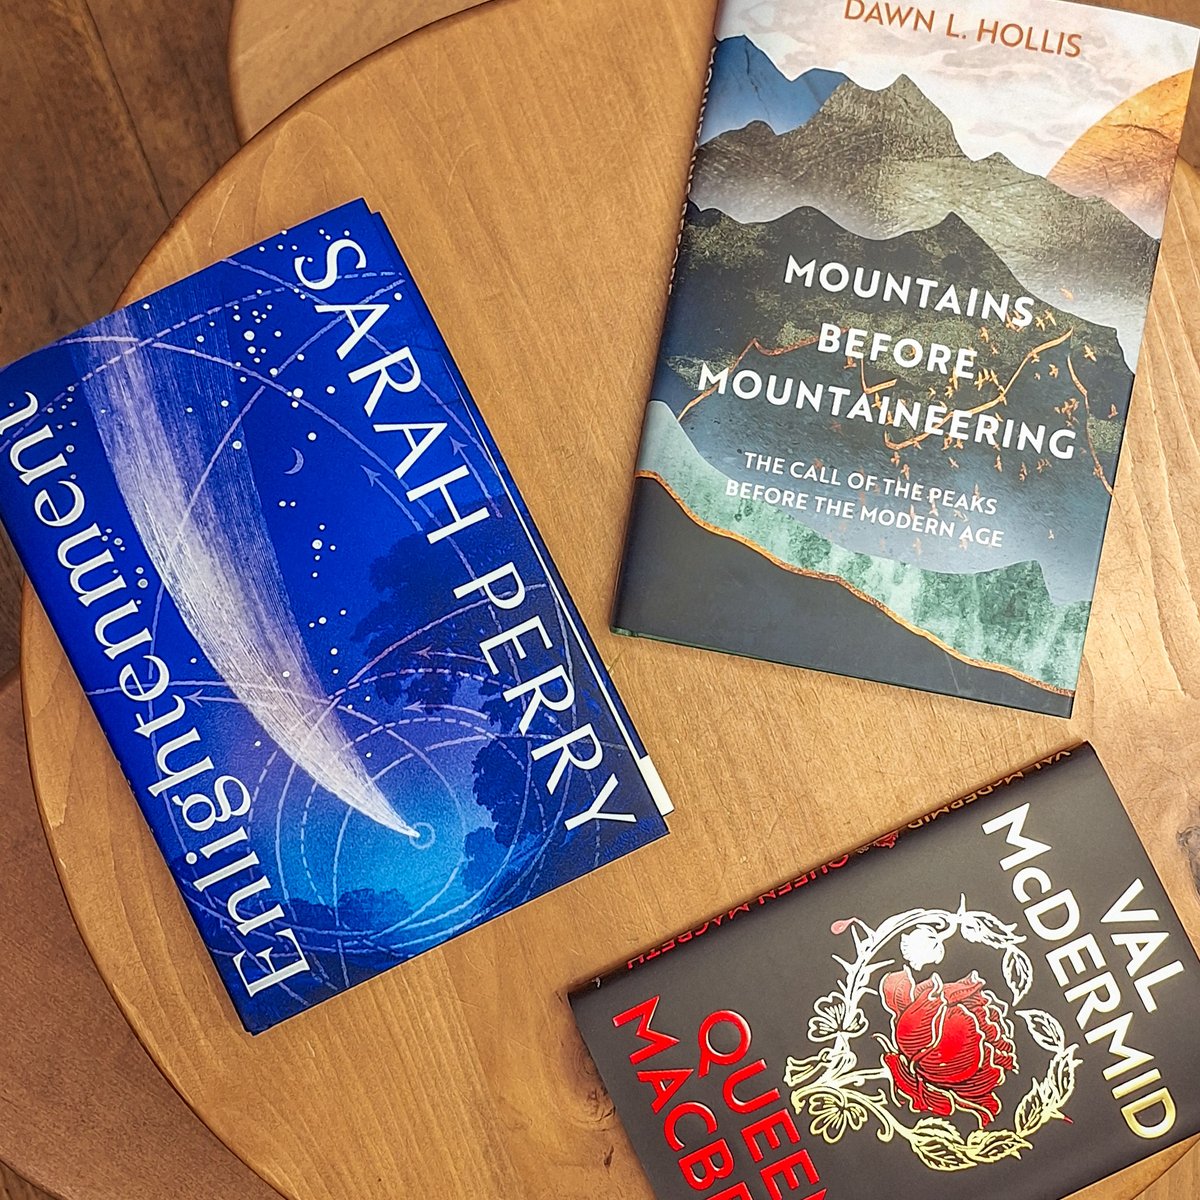 We have three fantastic events for you this week, all royally good. Make sure you don't miss out! 🗡Tuesday 7th May - ‘Queen Macbeth’, @valmcdermid 💫Wednesday 8th May - ‘Enlightenment’, Sarah Perry ⛰Friday 10th May - ‘Mountains Before Mountaineering, @HistoriansDesk